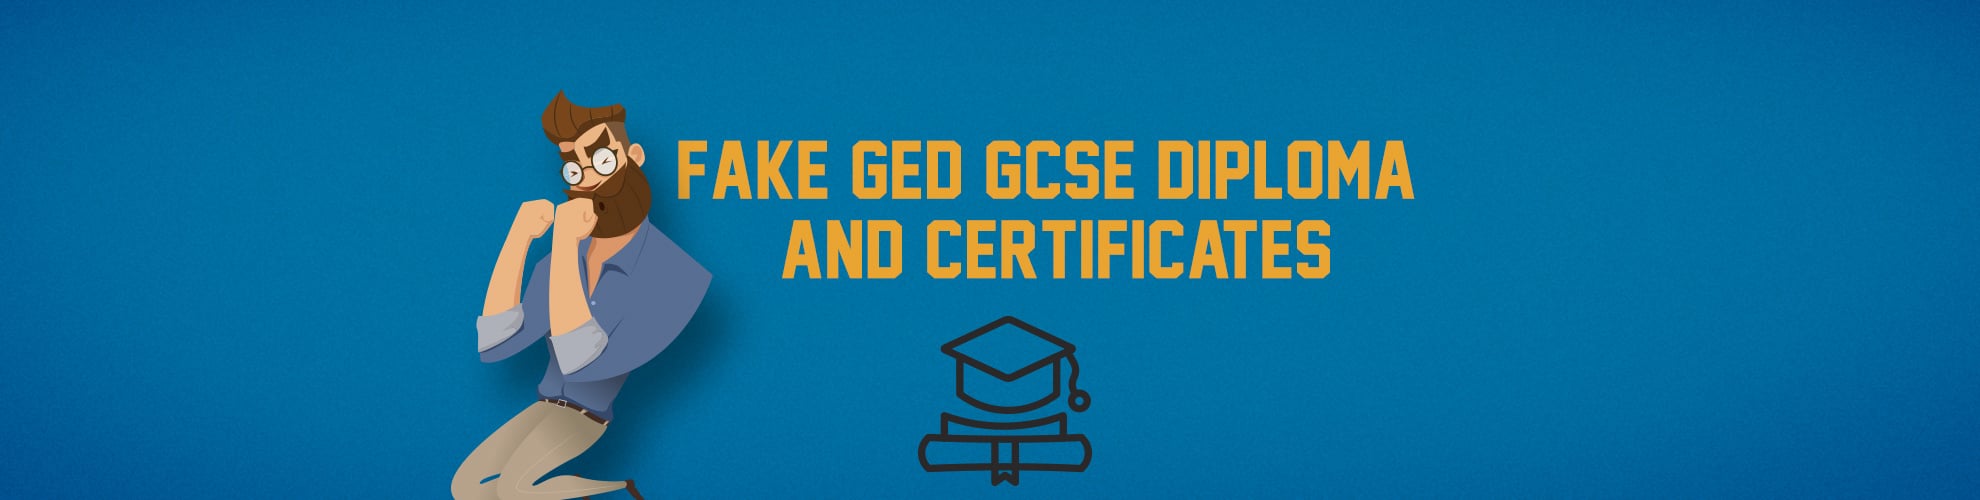 Fake GED, GCE, GCSE Diploma and Certificates